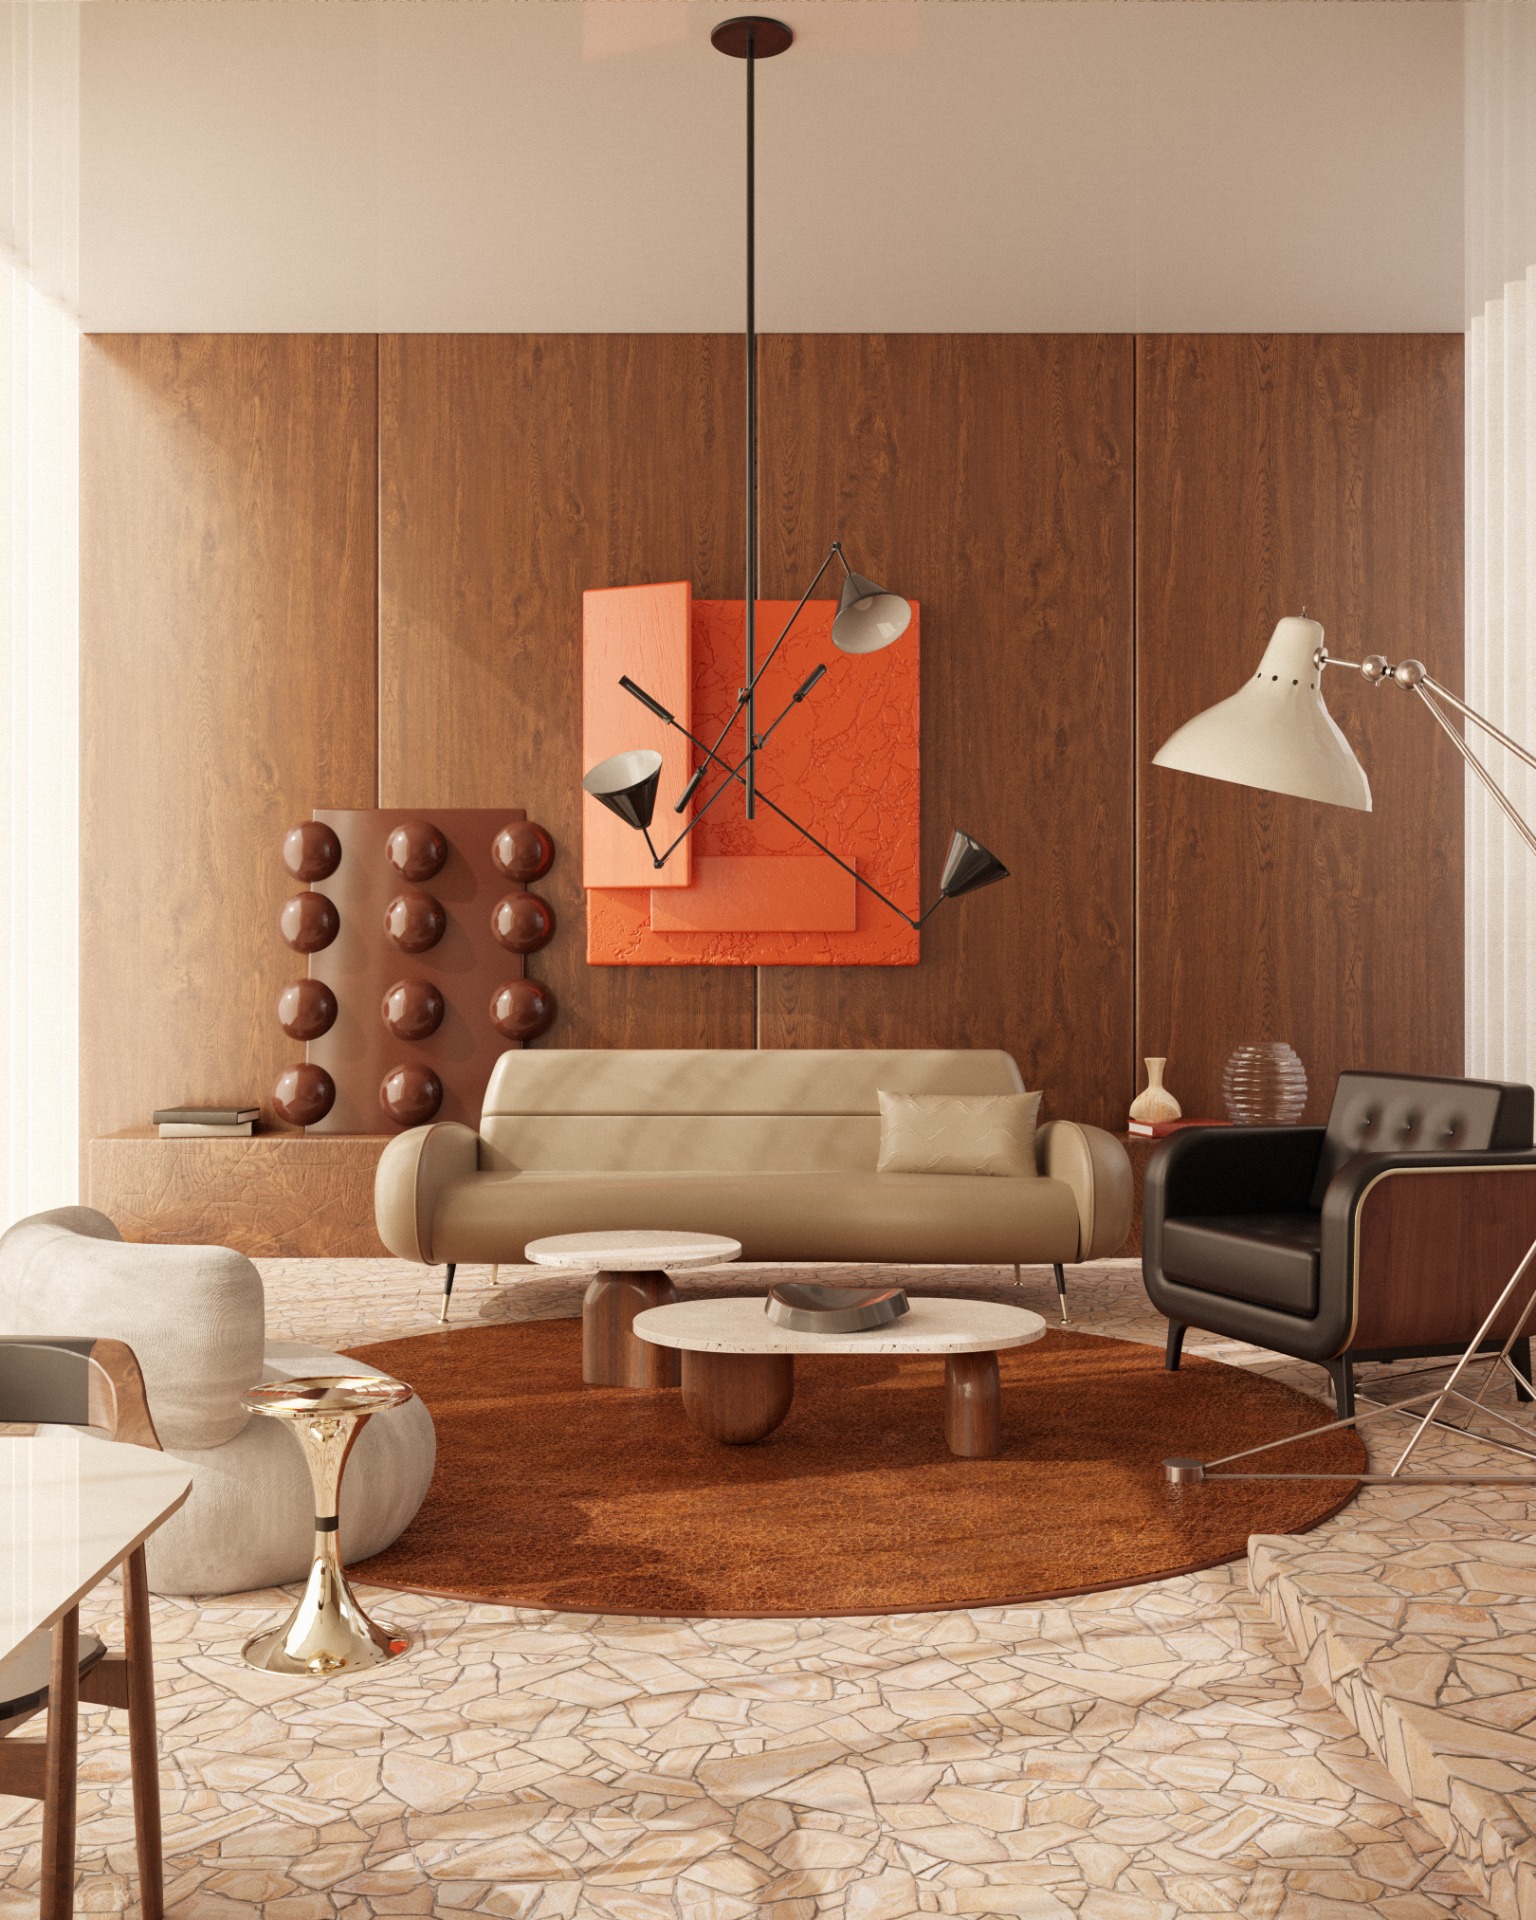 Makeover Of The Week: A Welcoming Mid-Century Modern Living Room